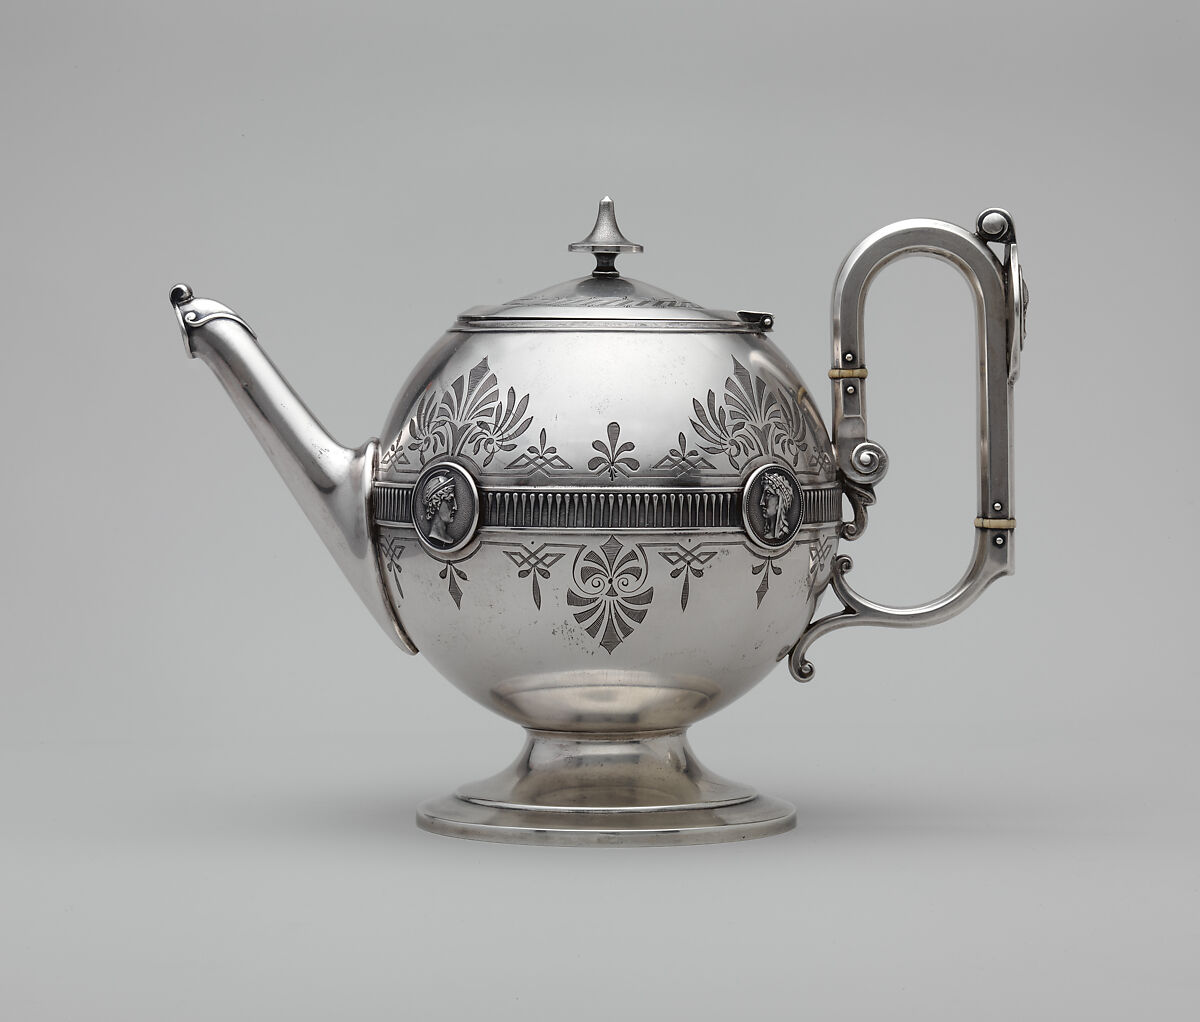 Teapot, Gorham Manufacturing Company (American, Providence, Rhode Island, 1831–present), Silver and ivory, American 